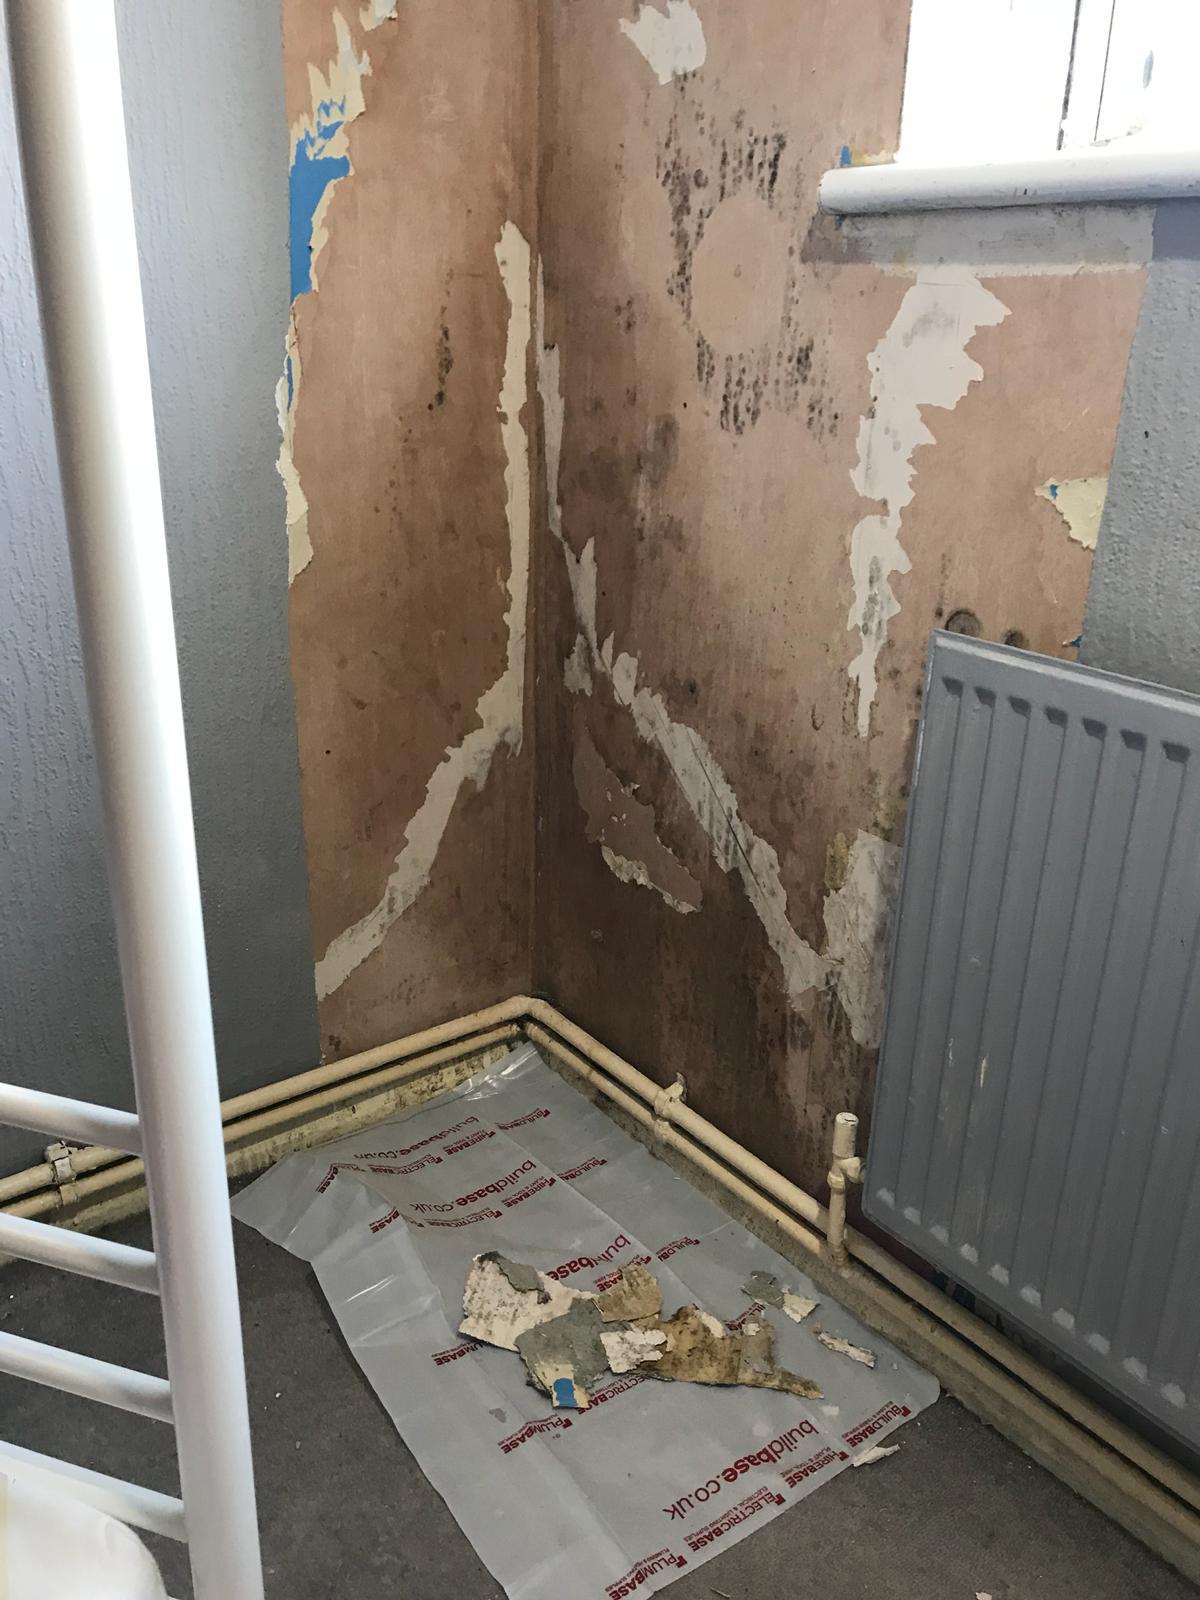  Ripped wallpaper reveals mould on the walls of the property